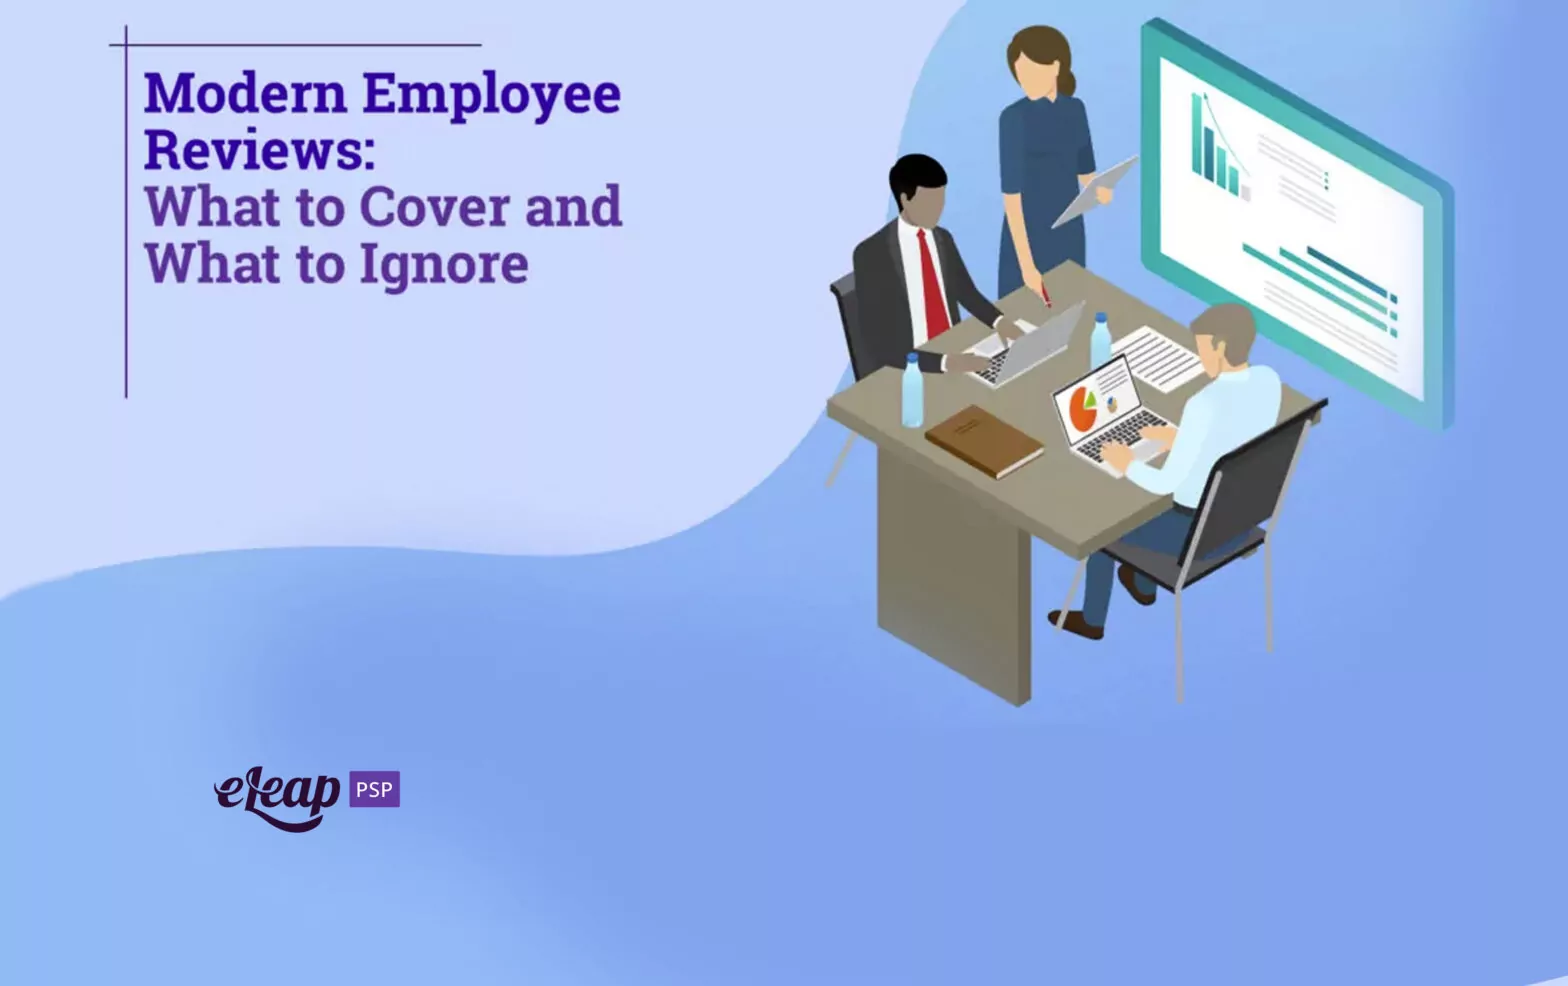 Modern Employee Reviews: What to Cover and What to Ignore